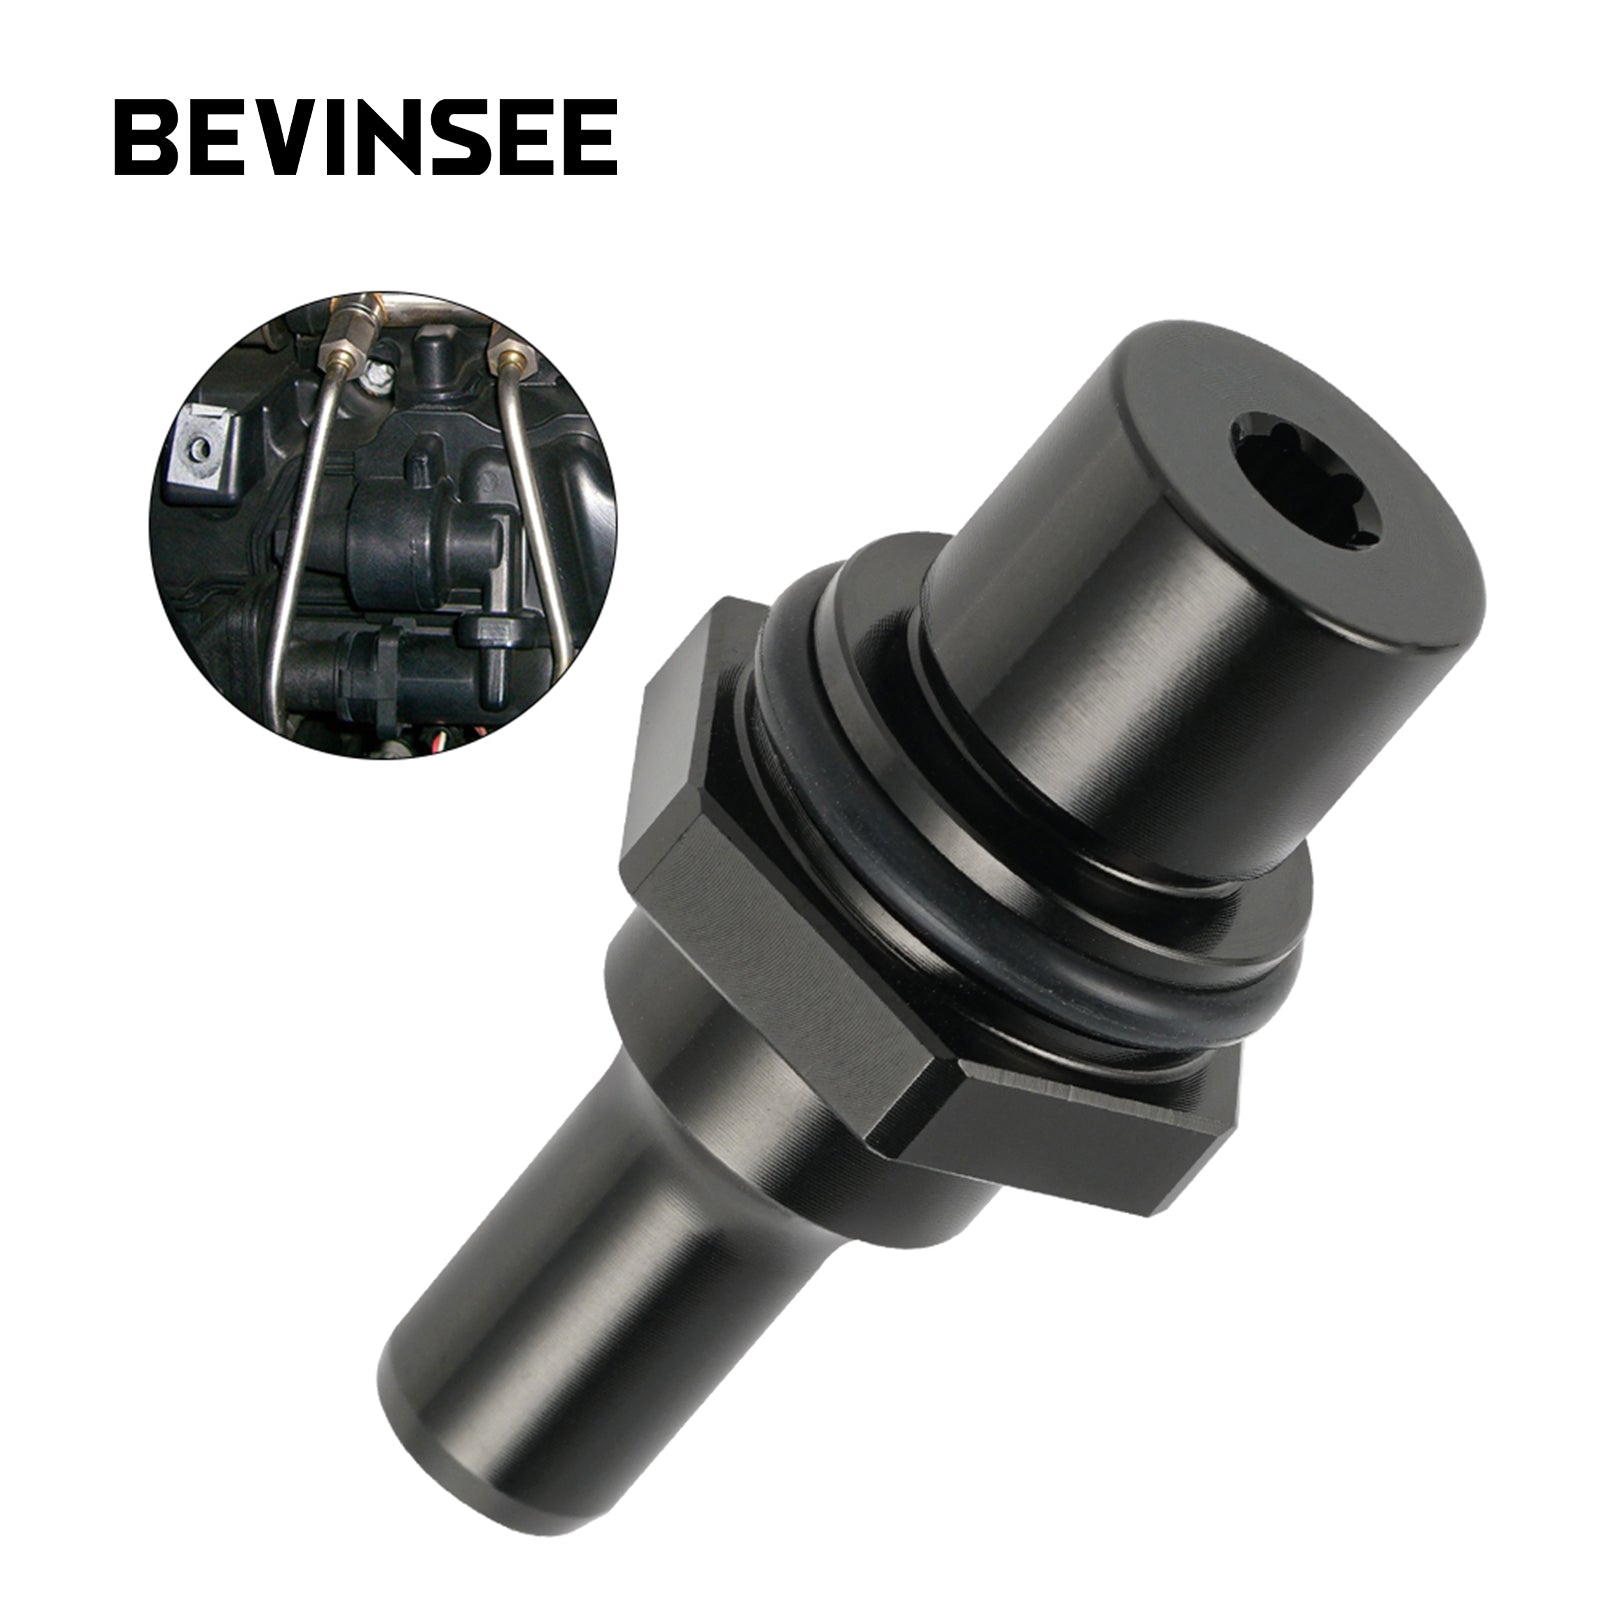 BEVINSEE For N54 PCV Valve + Cover Upgrade For BMW E82 E88 E89 E90 E91 E92 E93 E60 E61 E71 135i 335i 535i X6 Z4 Twin Turbo Engines